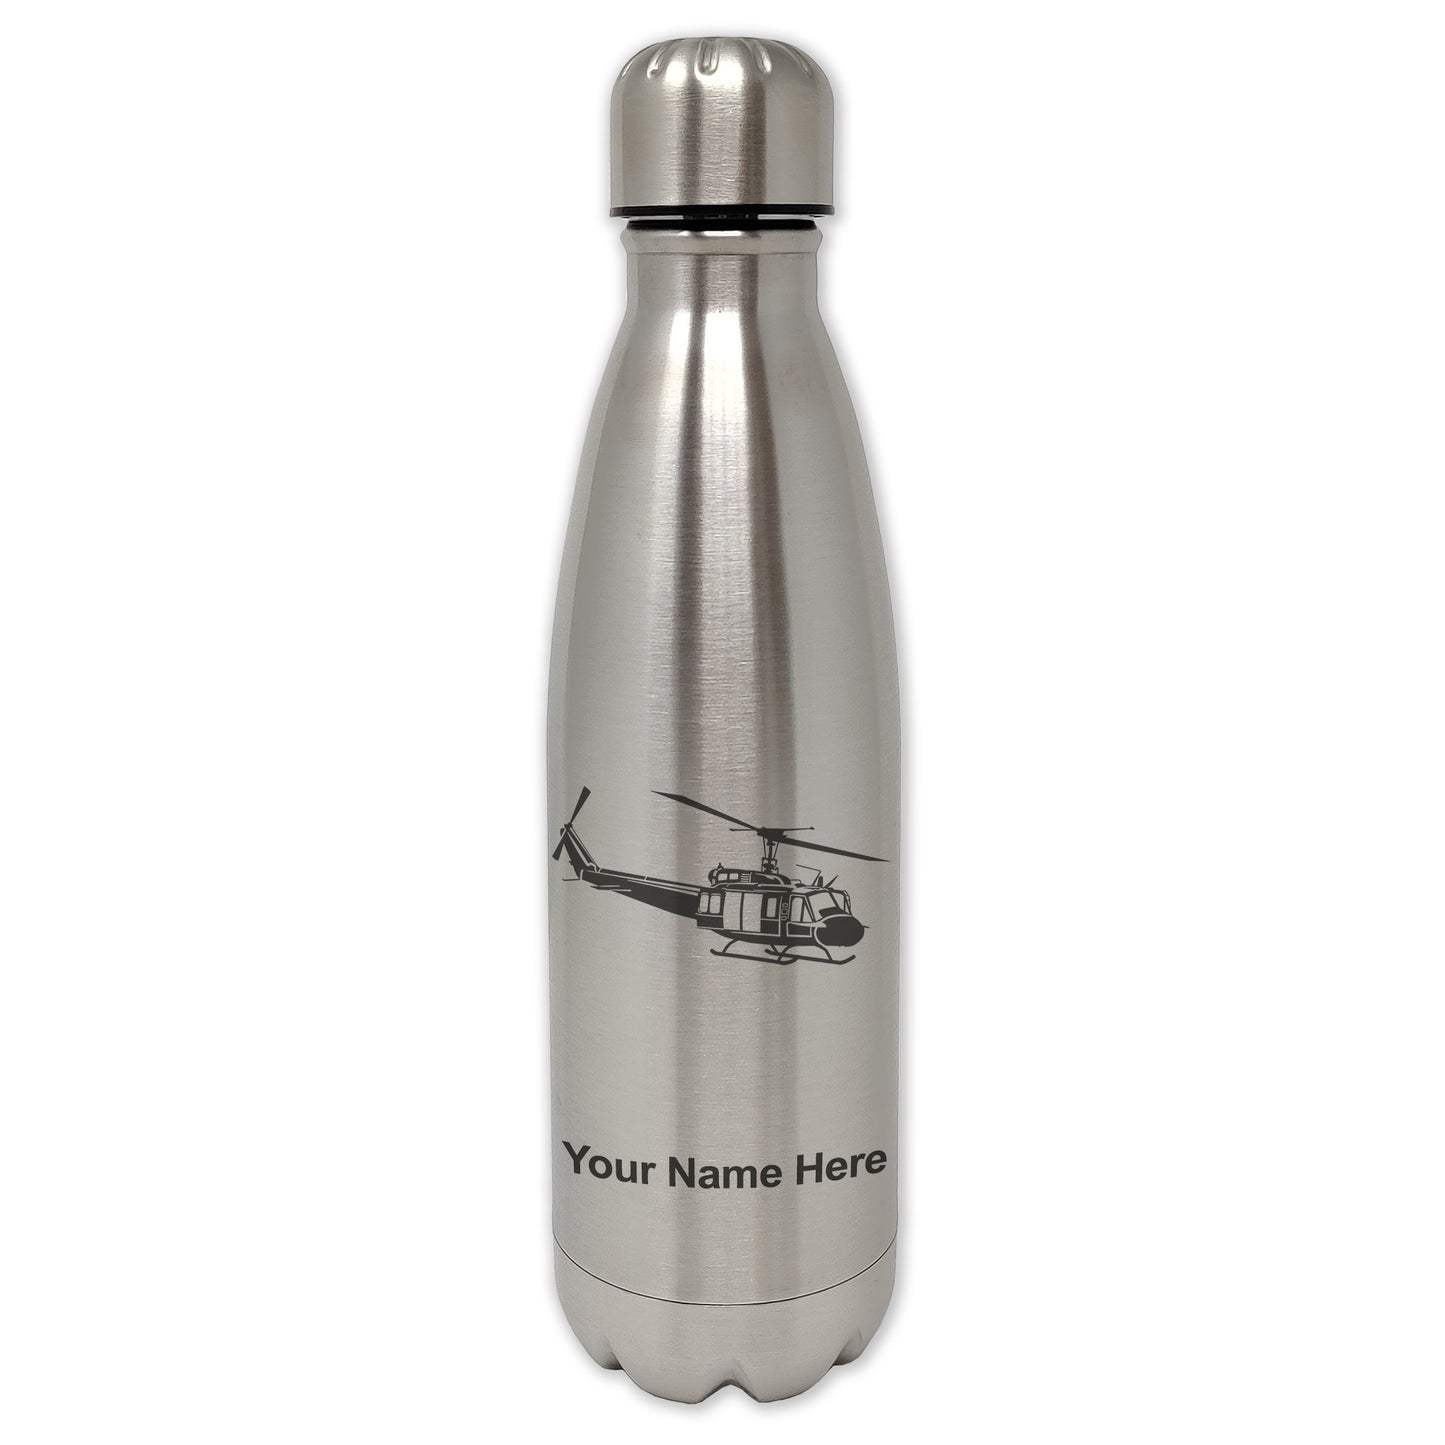 LaserGram Single Wall Water Bottle, Military Helicopter 2, Personalized Engraving Included